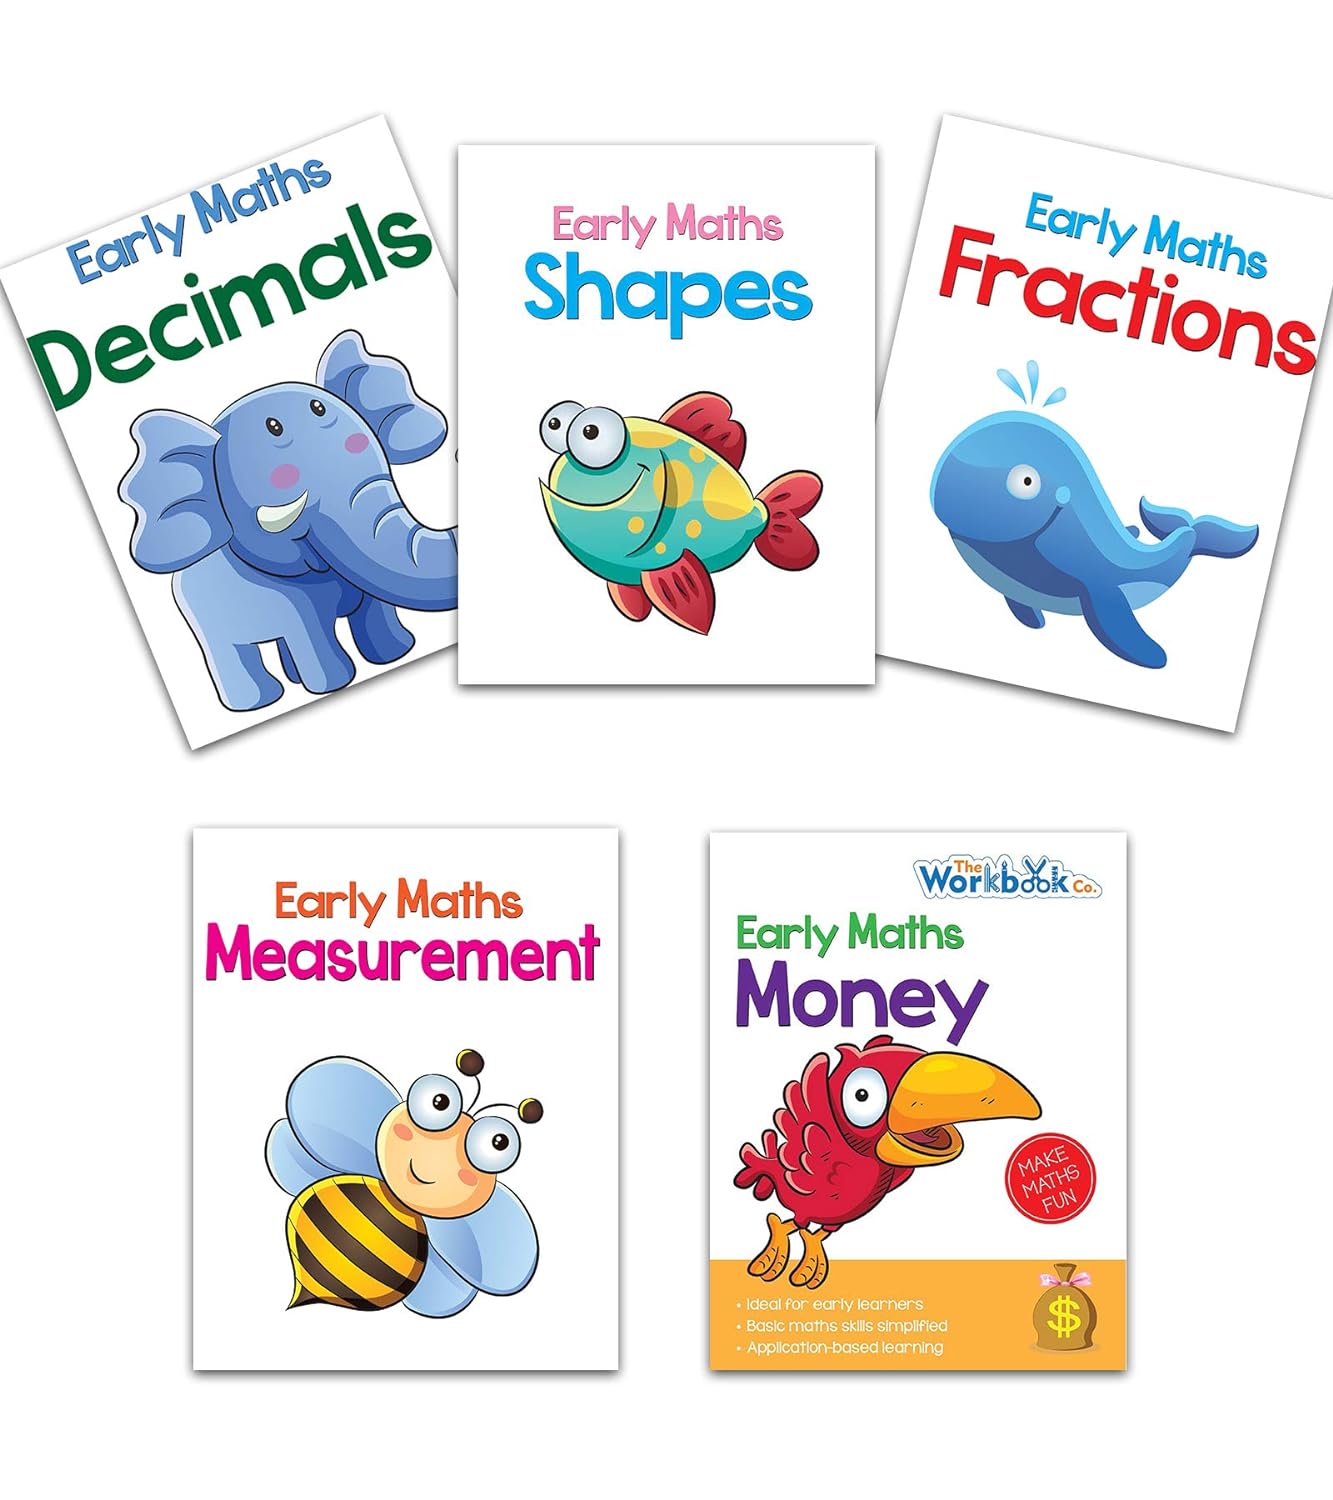 Pegasus Set of 5 Early Maths Learning Books covering Decimals, Fractions, Measuring, Money & Shapes